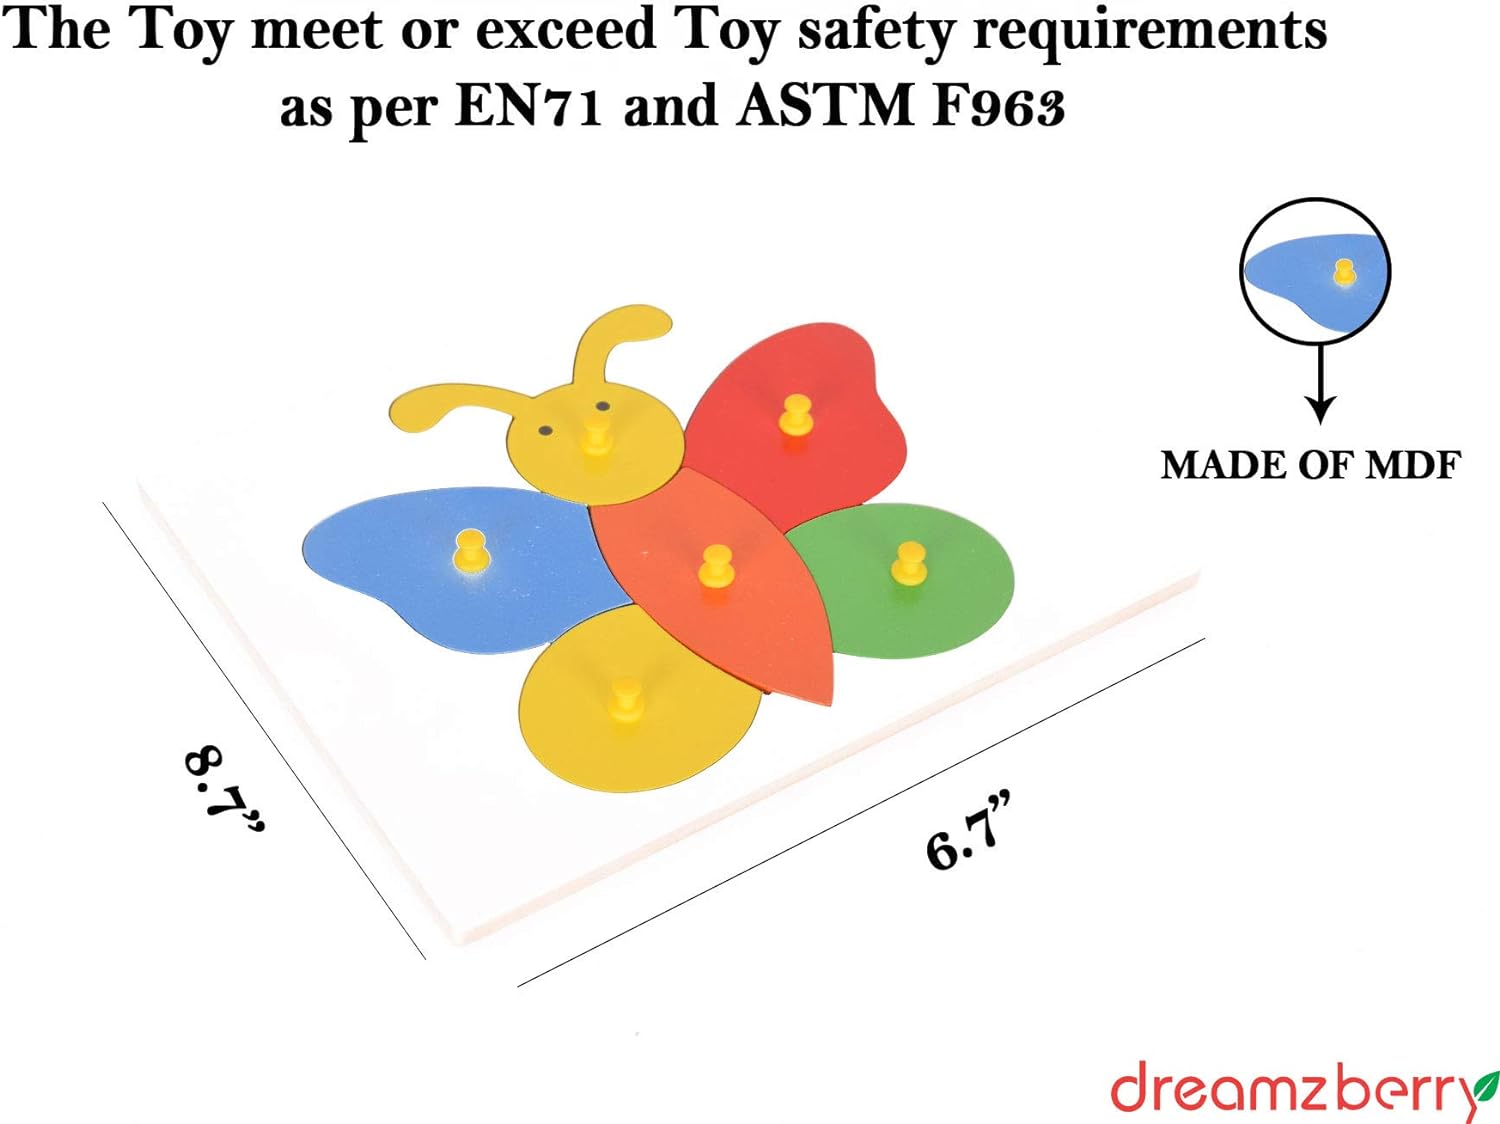 Dreamzberry Wooden Butterfly Puzzle: A Fun and Educational Toy for Kids